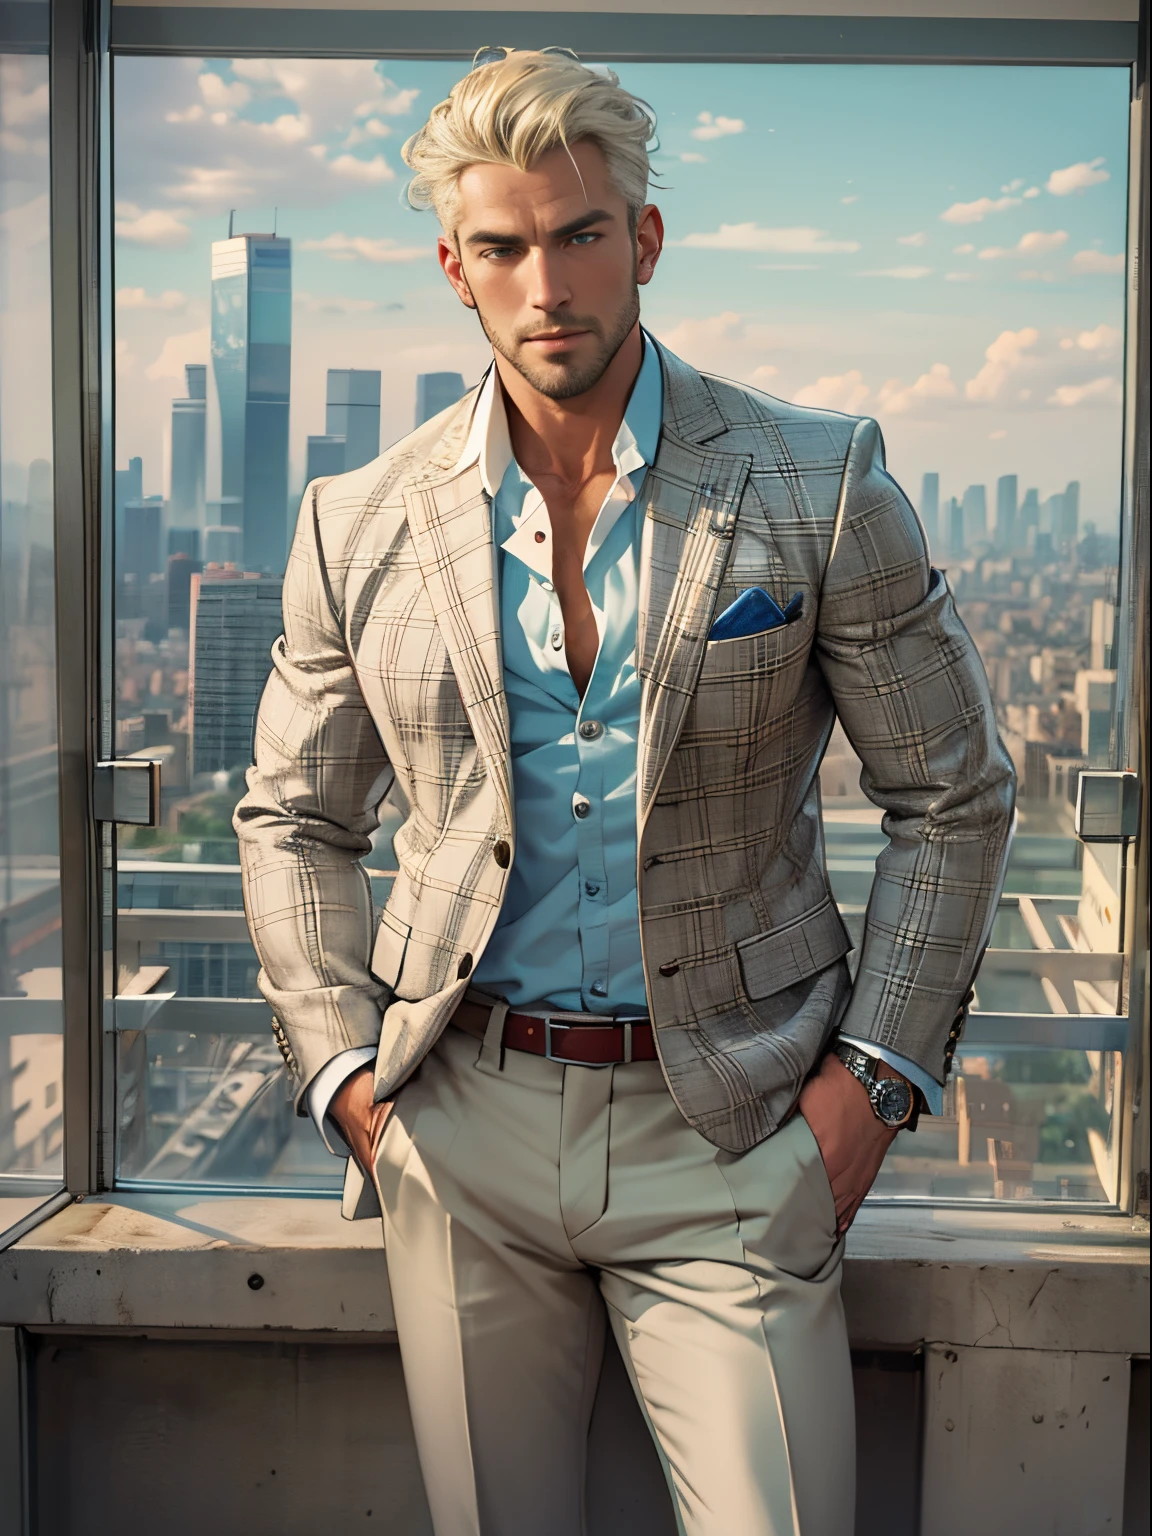 distinguished gentleman in a suit, light-colored hair, chest revealed, bare chest, pec muscles, buttons open, mature, stubble, CEO in a penthouse skyline view, confident posture, muscular, revealing clothes